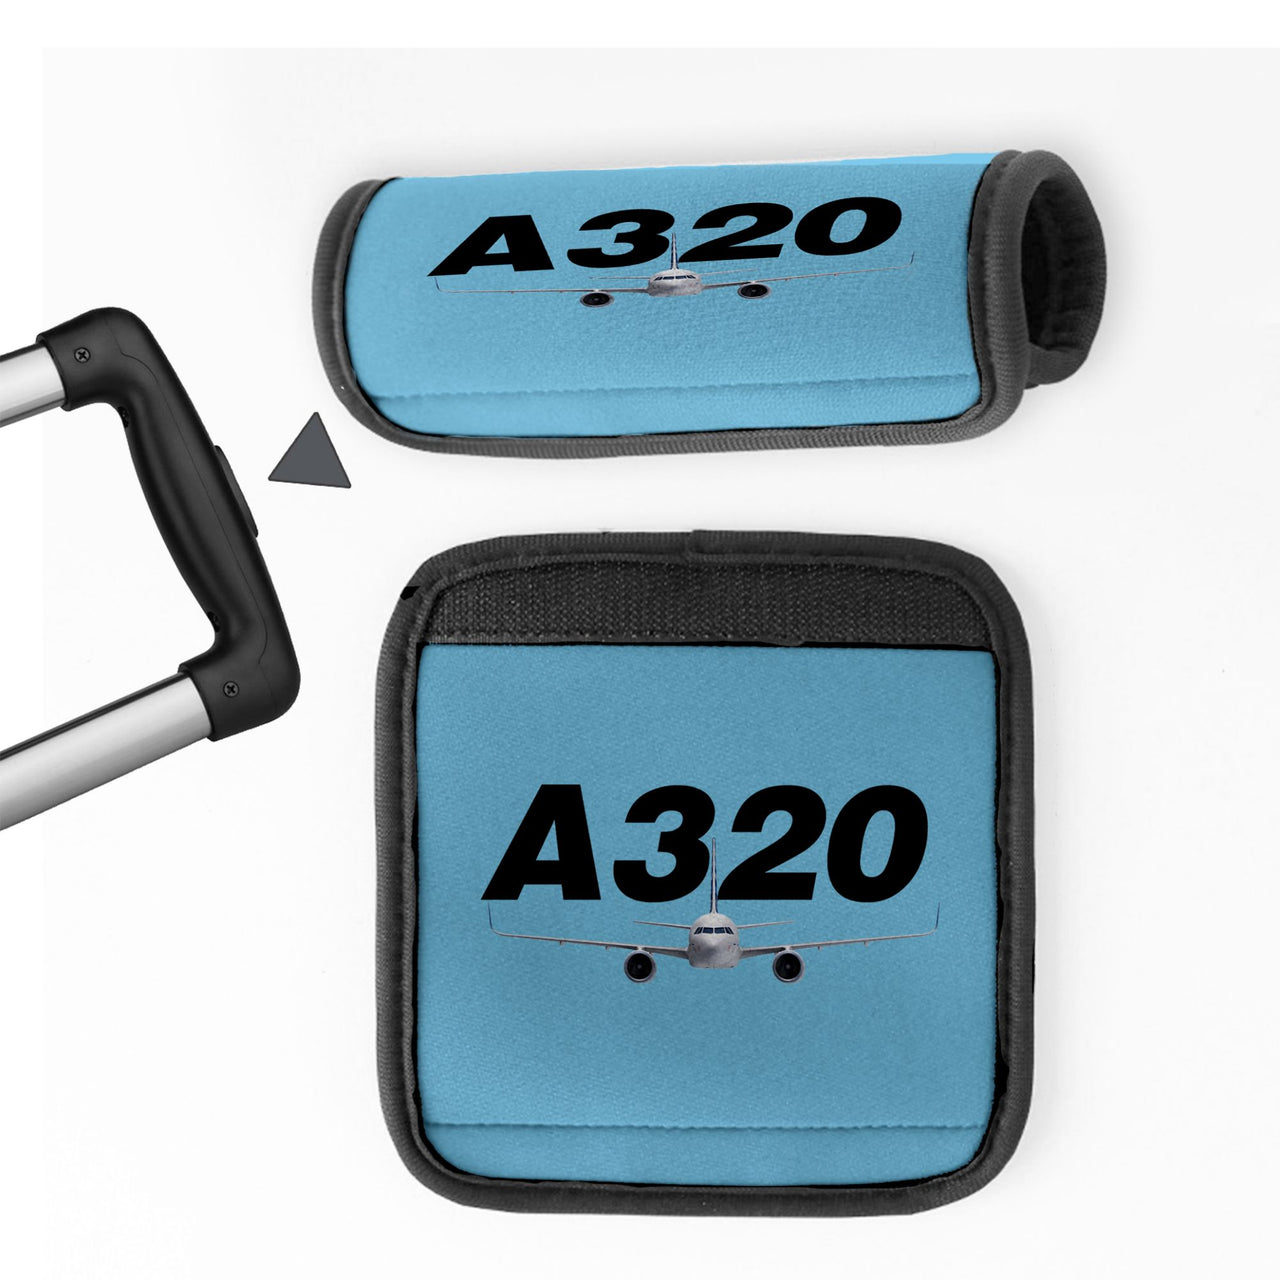 Super Airbus A320 Designed Neoprene Luggage Handle Covers